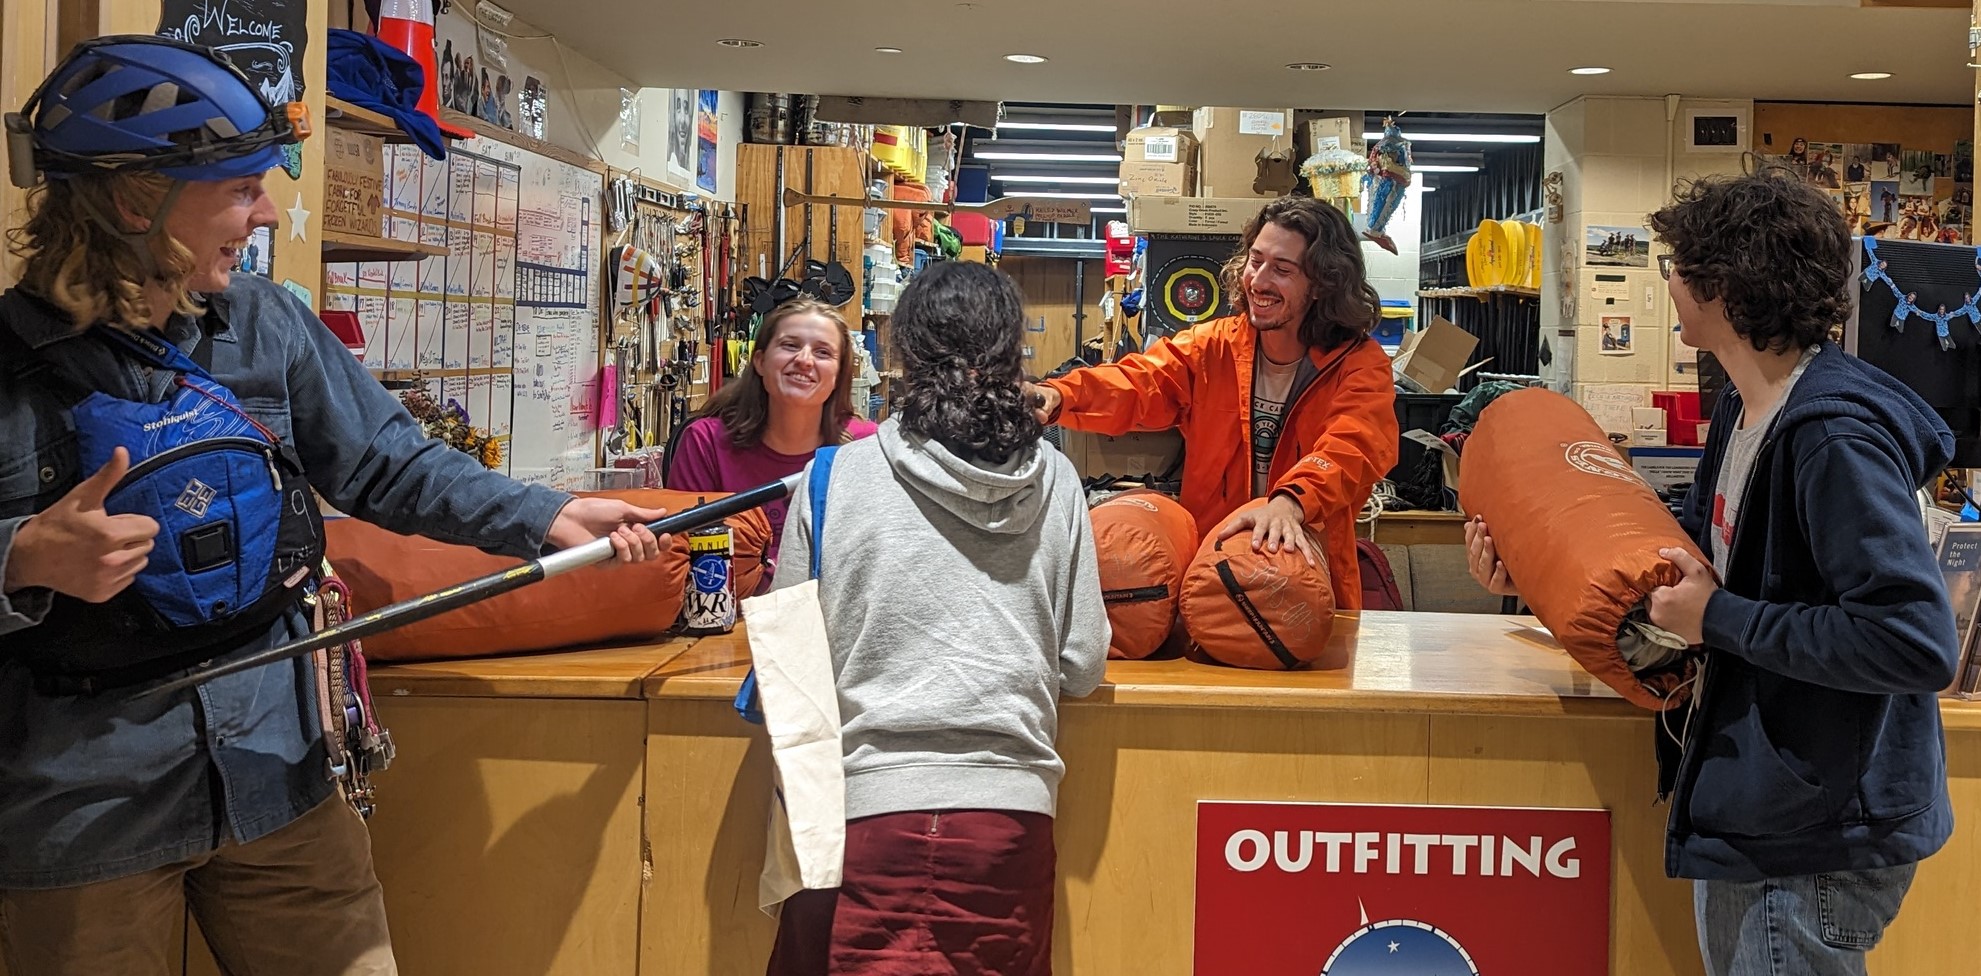 Students at the COE Outfitting desk renting and returning gear